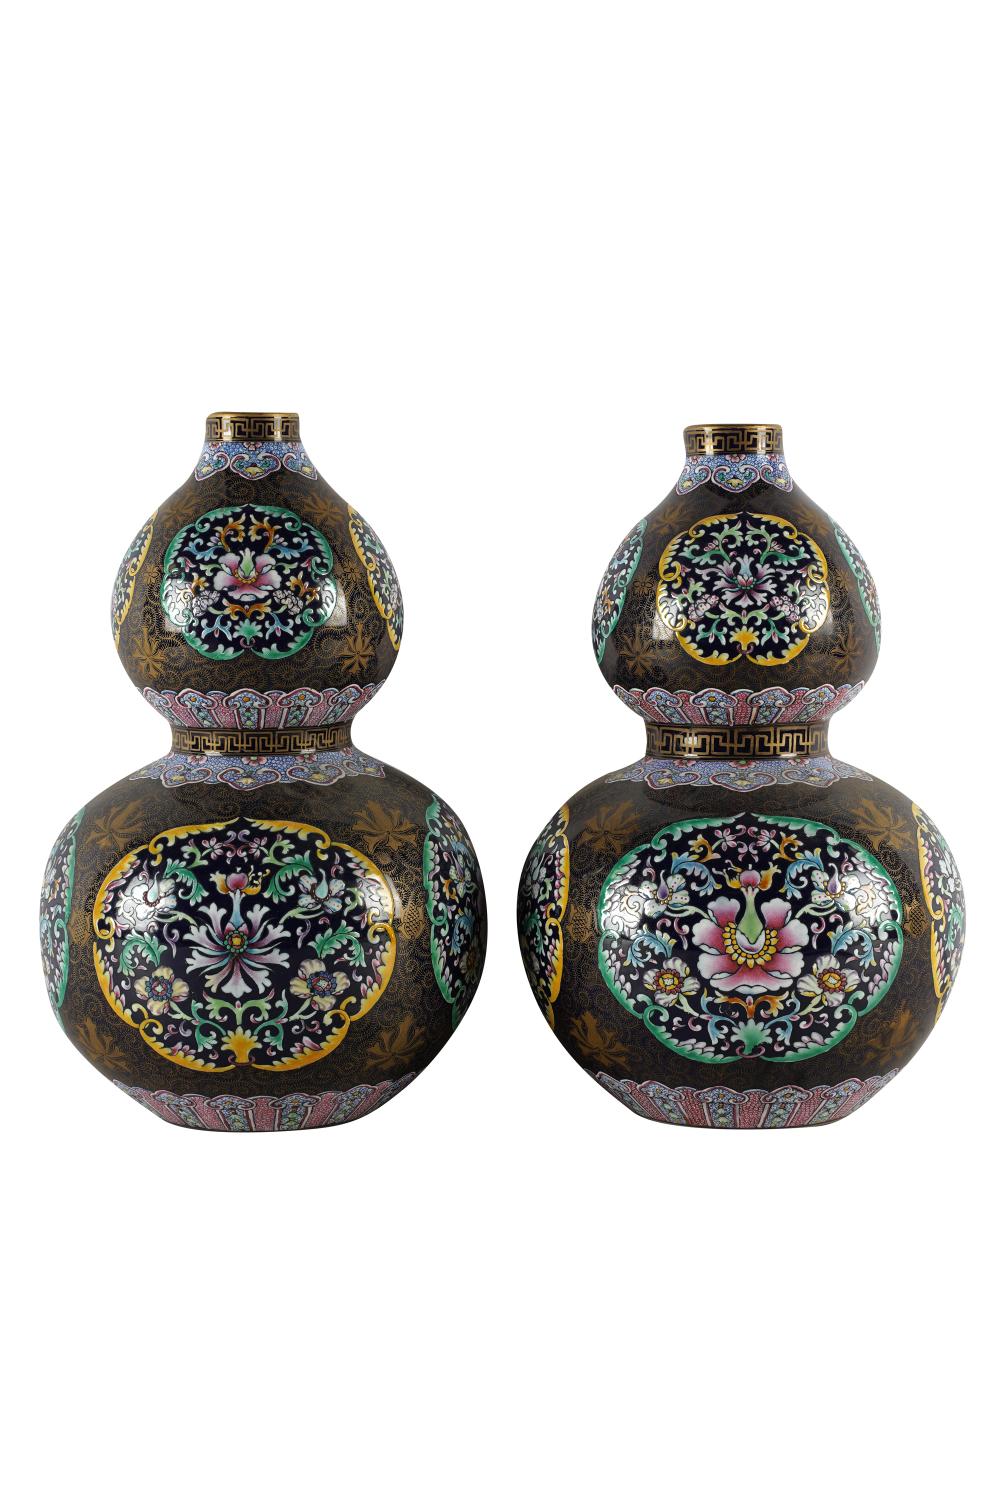 PAIR OF CHINESE DOUBLE GOURD PORCELAIN 33387b